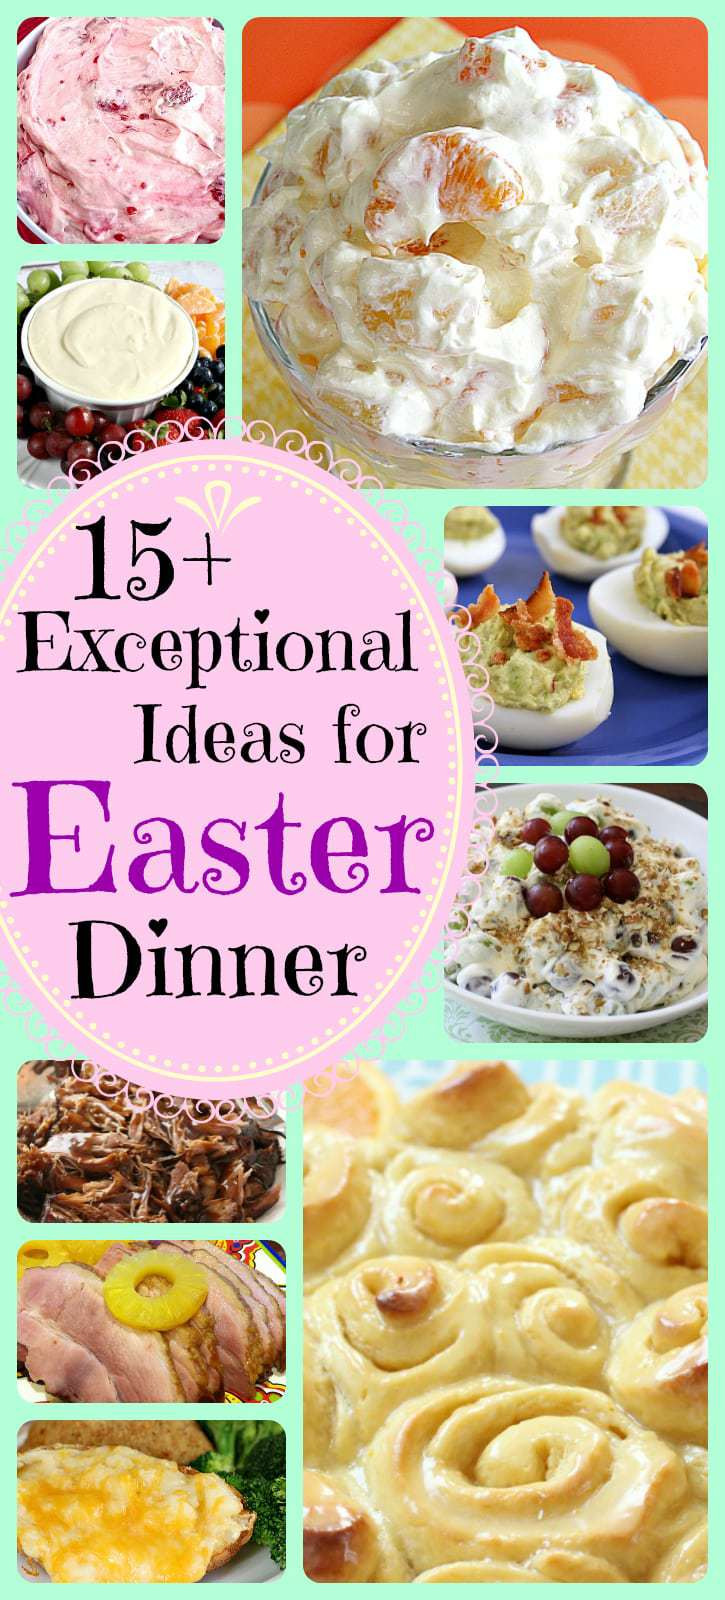 Easy Easter Dinner Recipes
 EASY & DELICIOUS EASTER DINNER RECIPES Butter with a